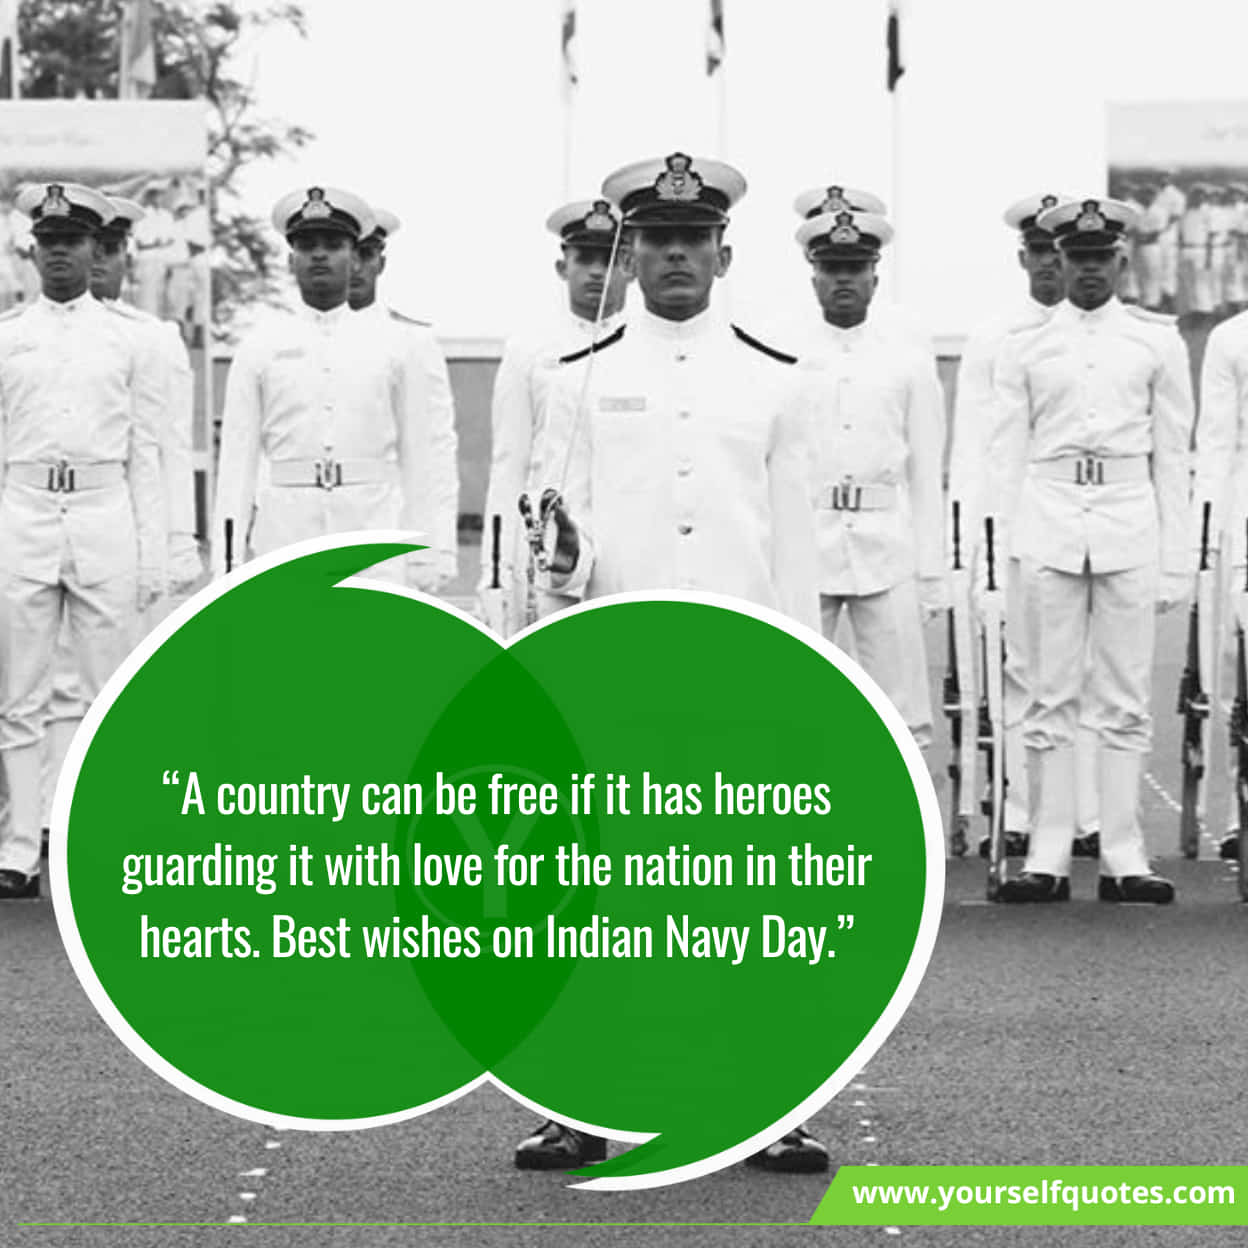 Messages & Slogans For Indian Navy Day